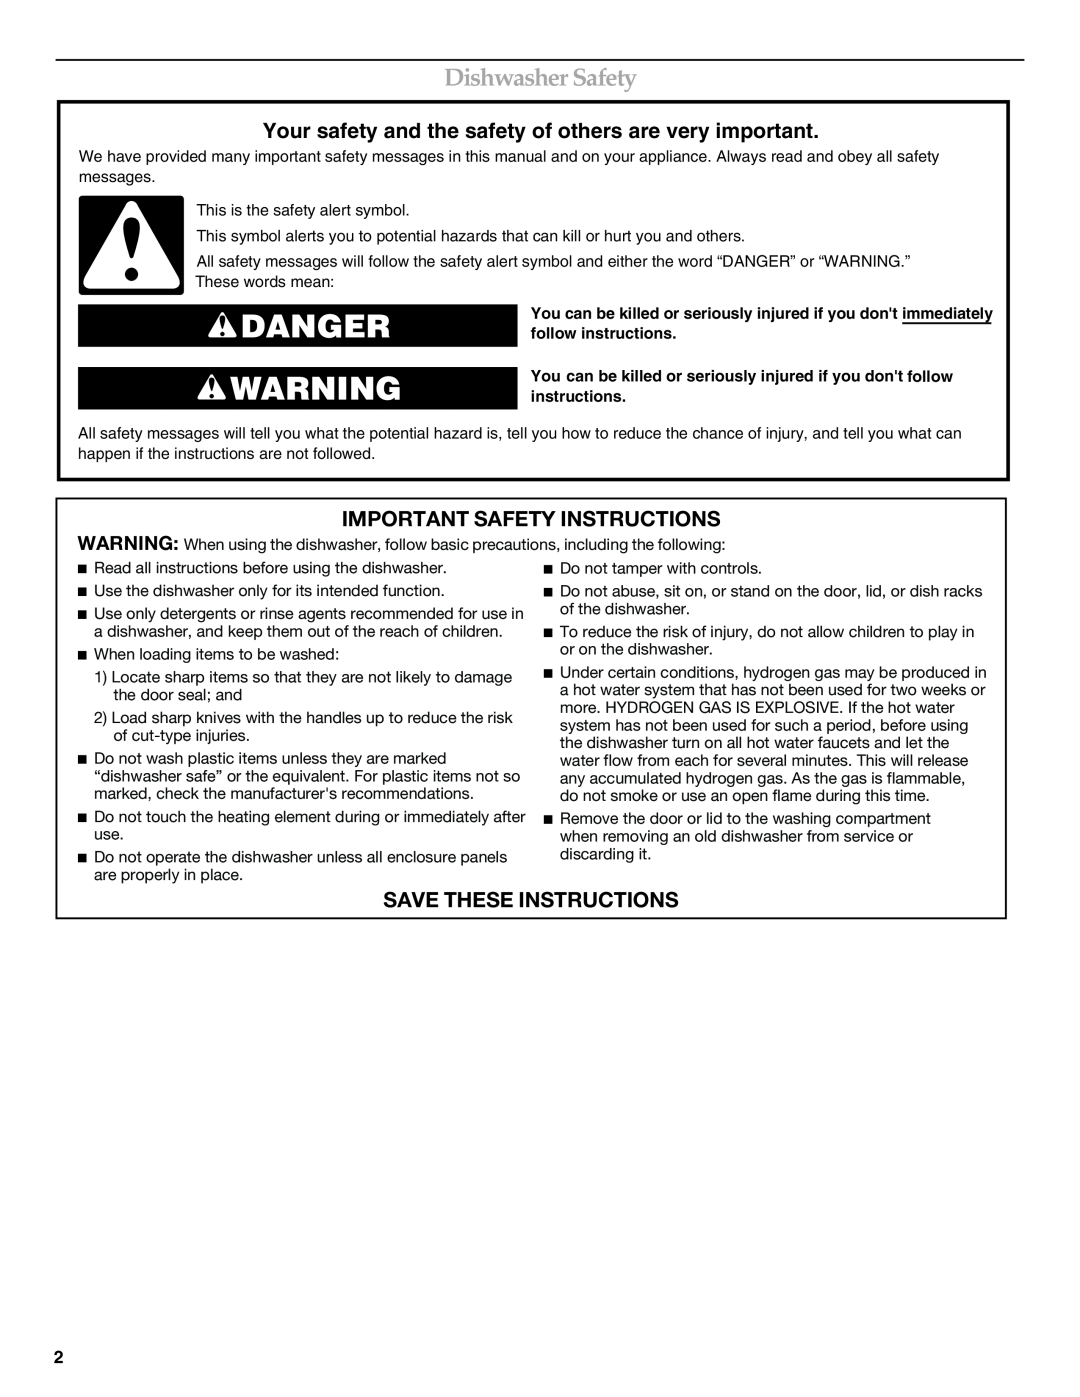 Whirlpool W10300929B warranty Danger, Dishwasher Safety, Important Safety Instructions, Save These Instructions 